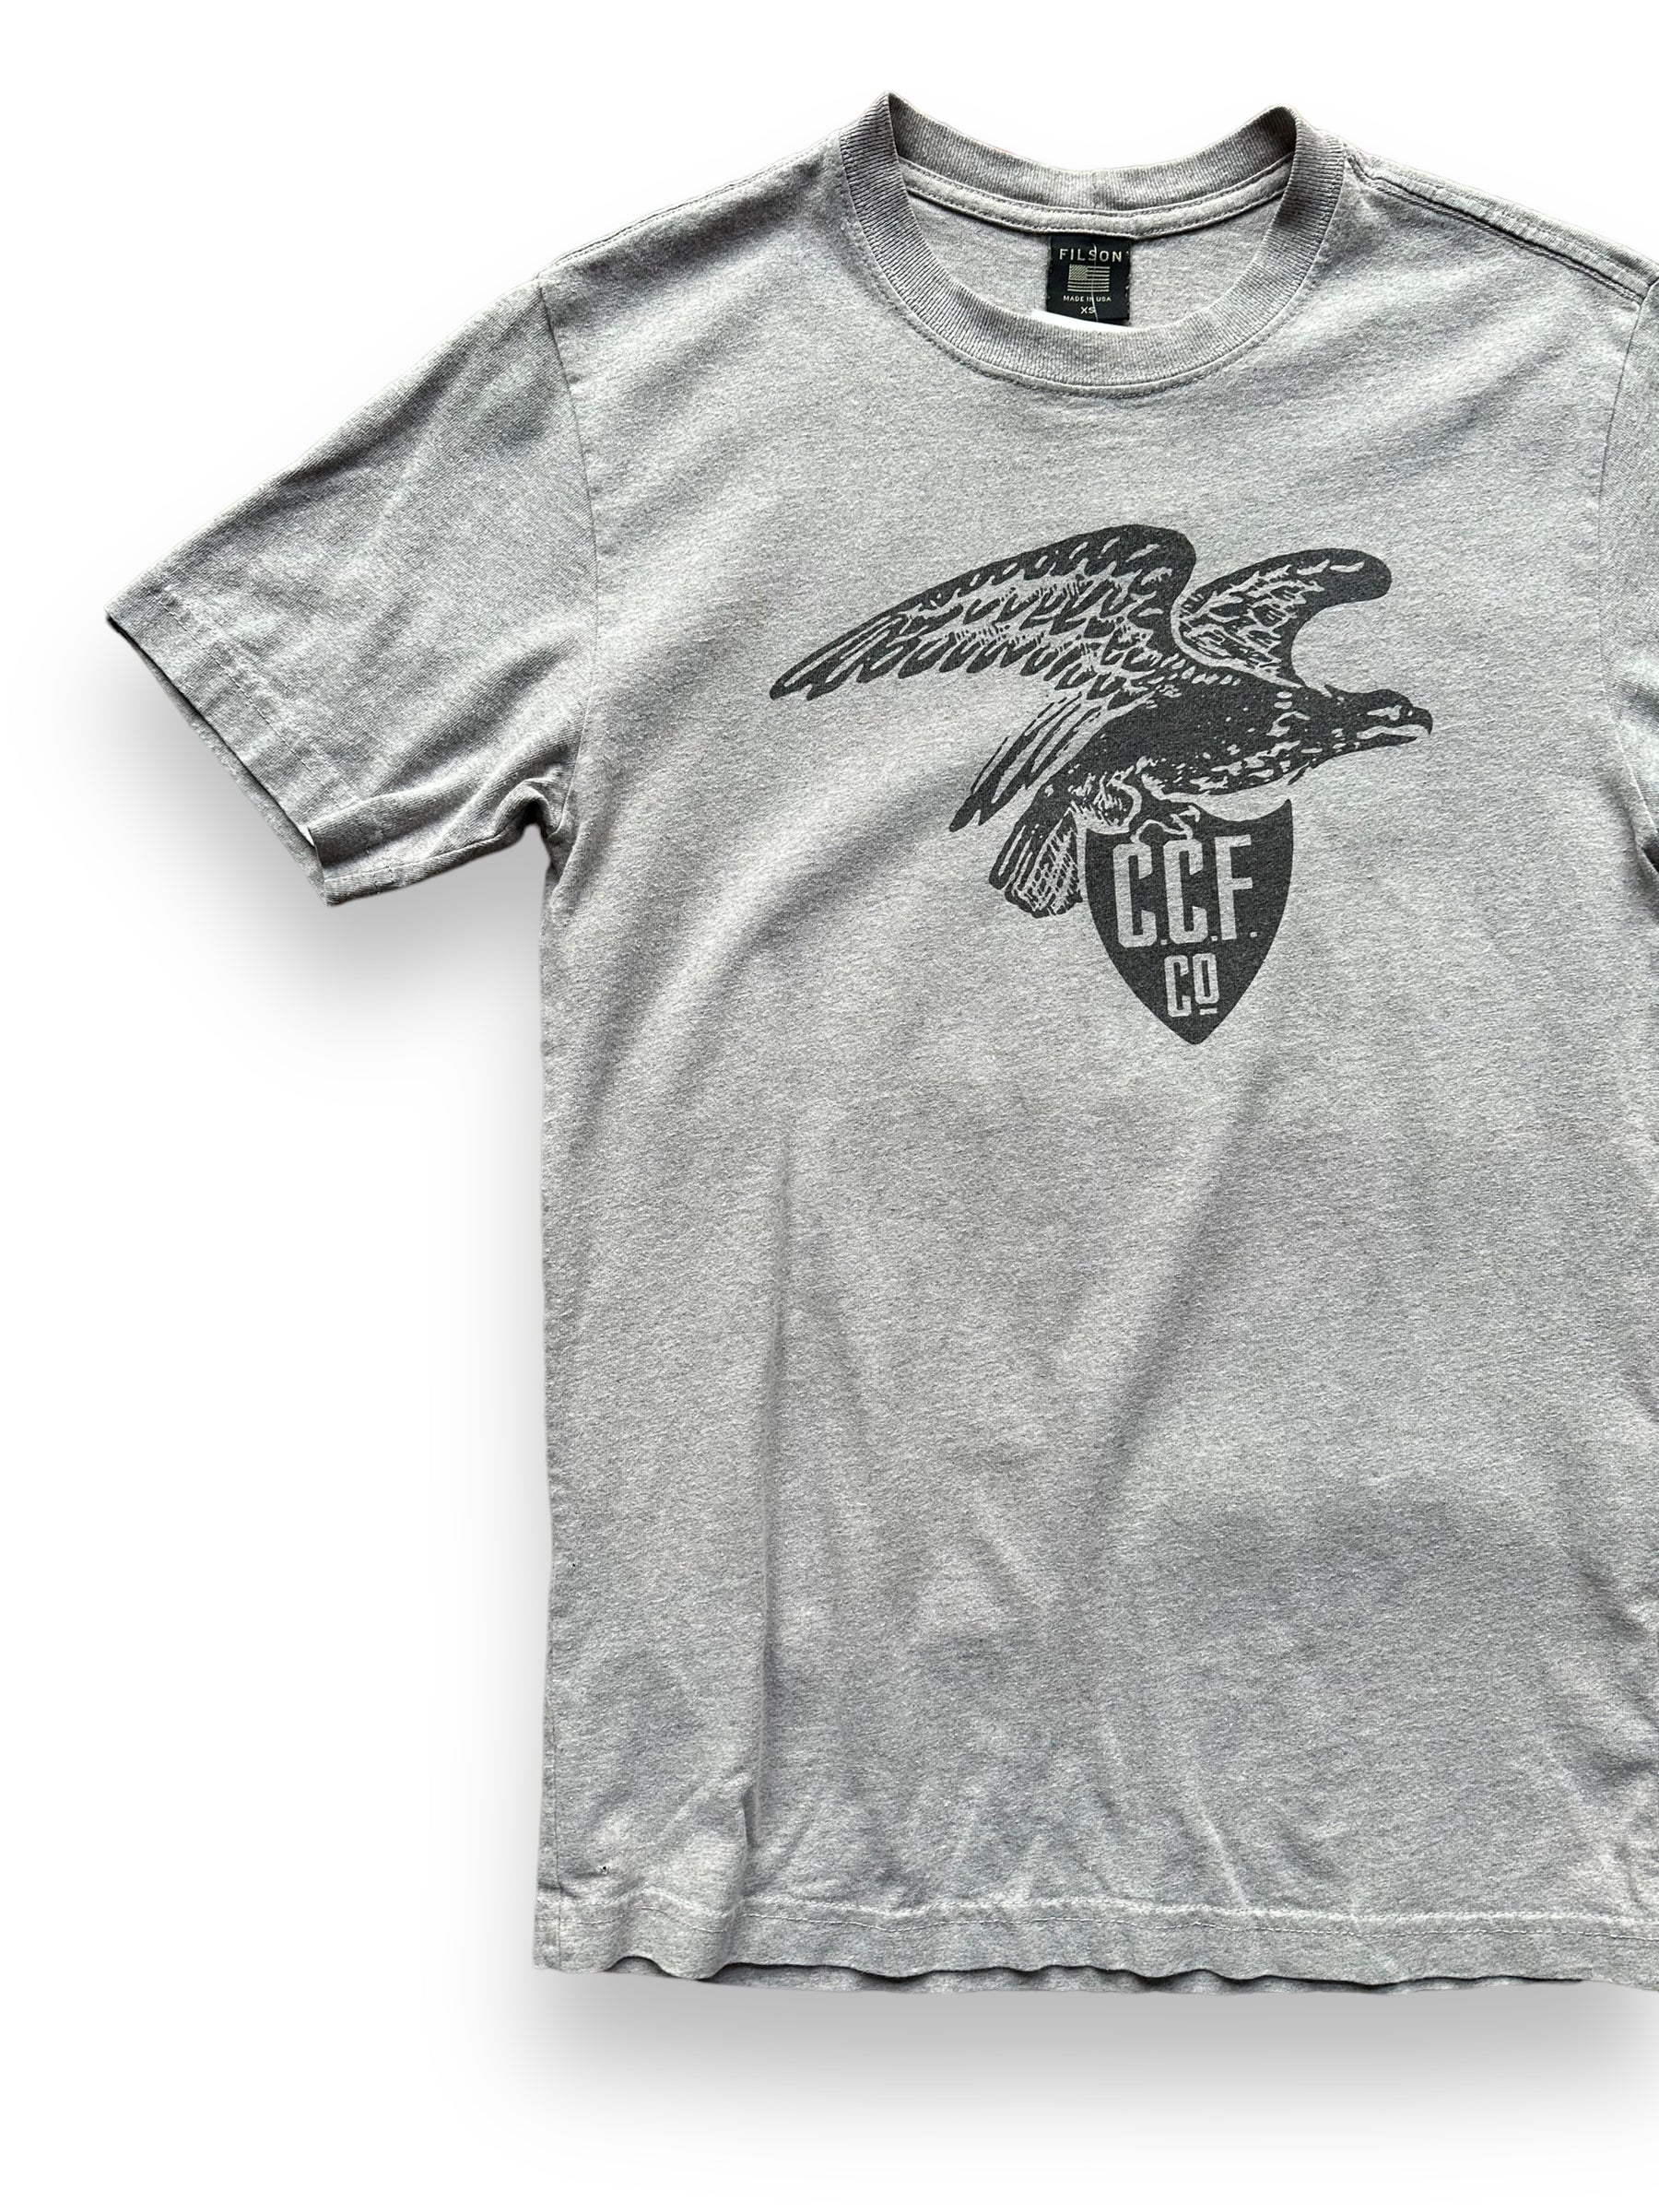 Front Right View of Grey Filson Eagle Graphic Tee SZ XS |  Barn Owl Vintage Goods | Vintage Filson Workwear Seattle